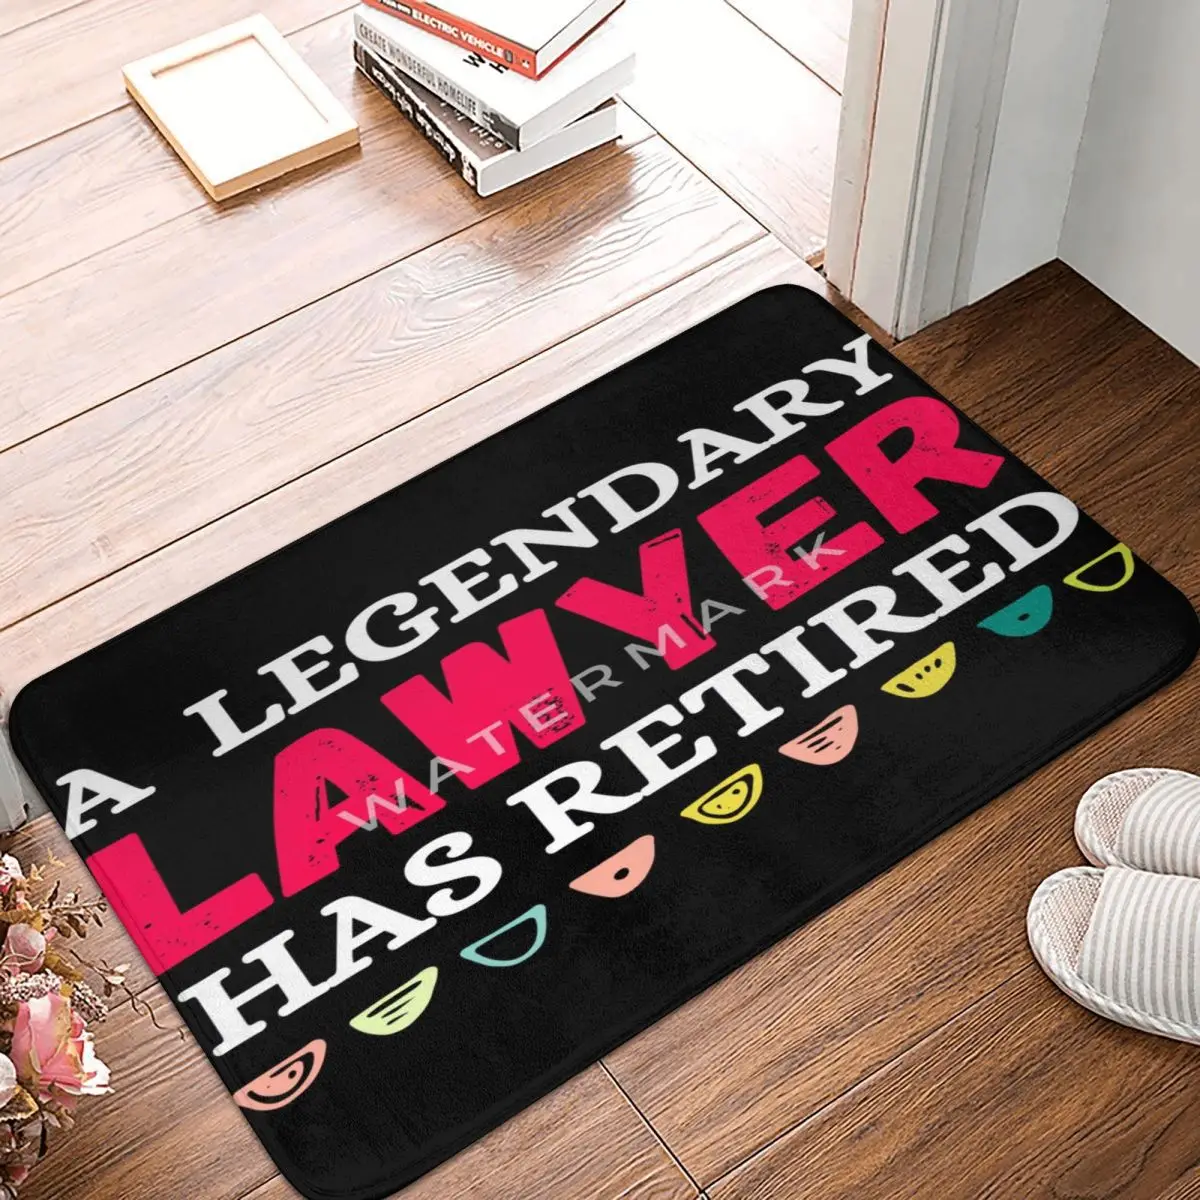 

A Legendary Lawyer Has Retired Carpet, Polyester Floor Mats Fashionable Practical Easy To Clean Festivle Gifts Mats Customizable